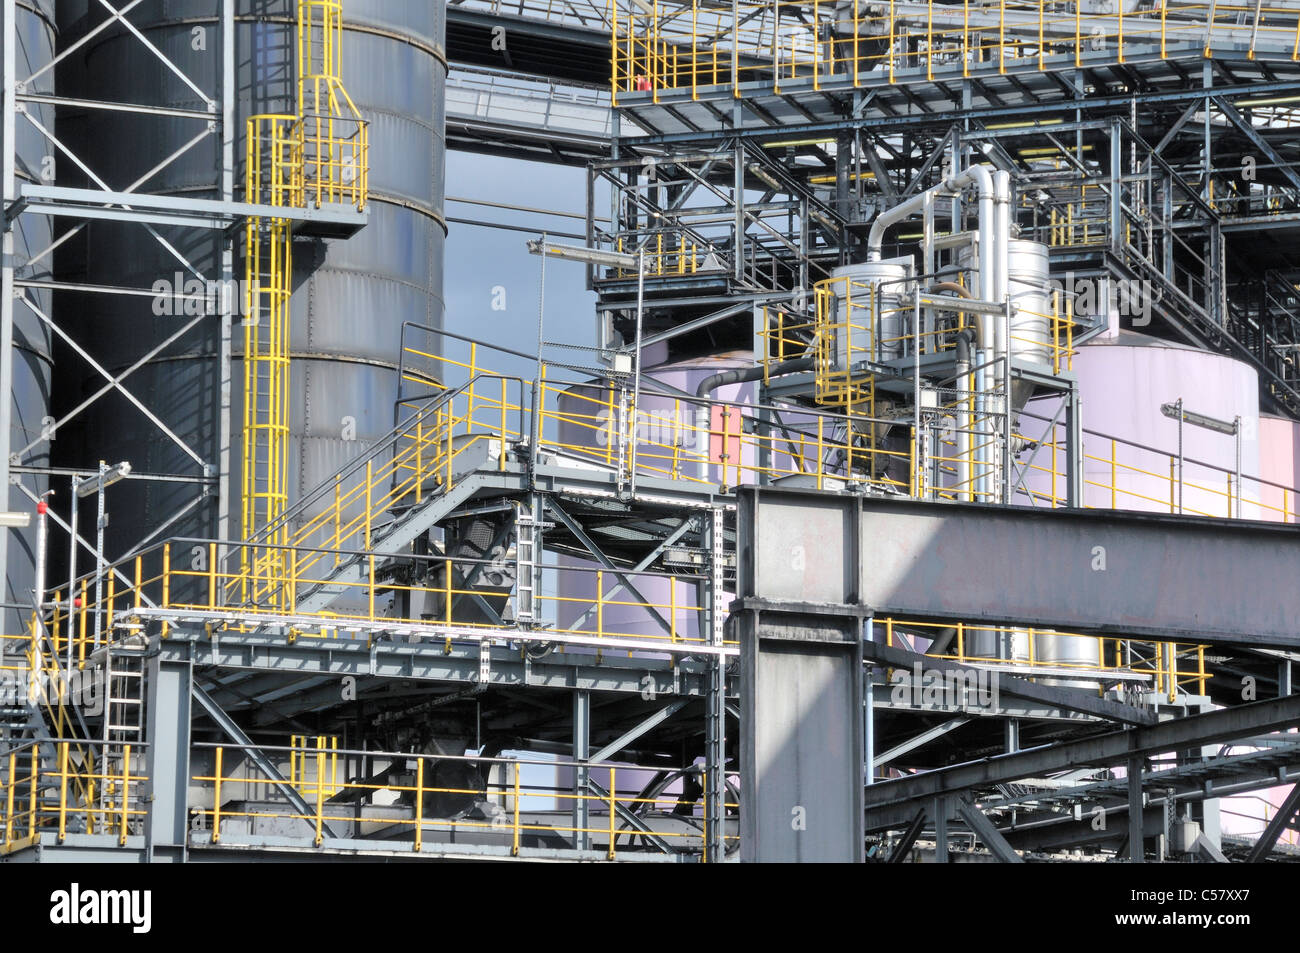 Industry, chemistry, chemistry work, chemical concern, outside, building, construction, Germany, Europe, chemistry factory, Evon Stock Photo